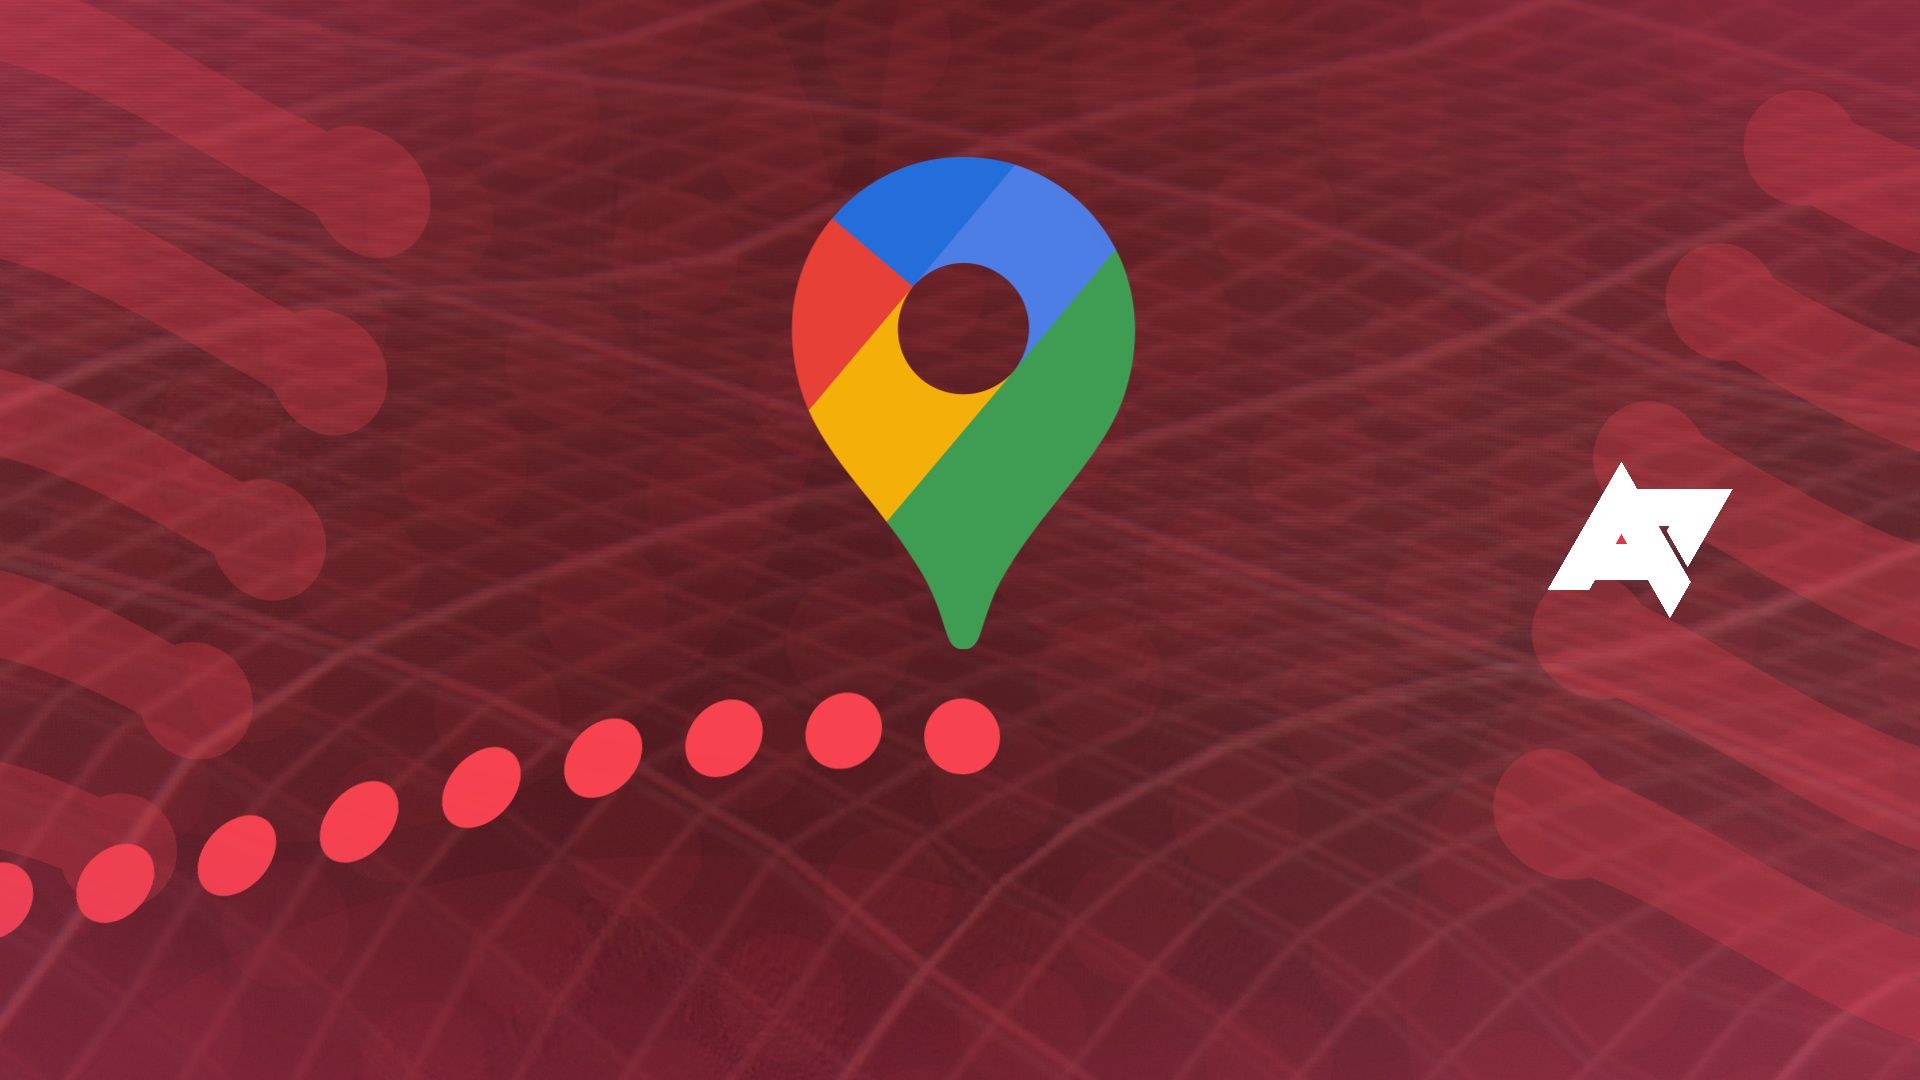 Publish your Google Maps drafts now or forever hold your peace